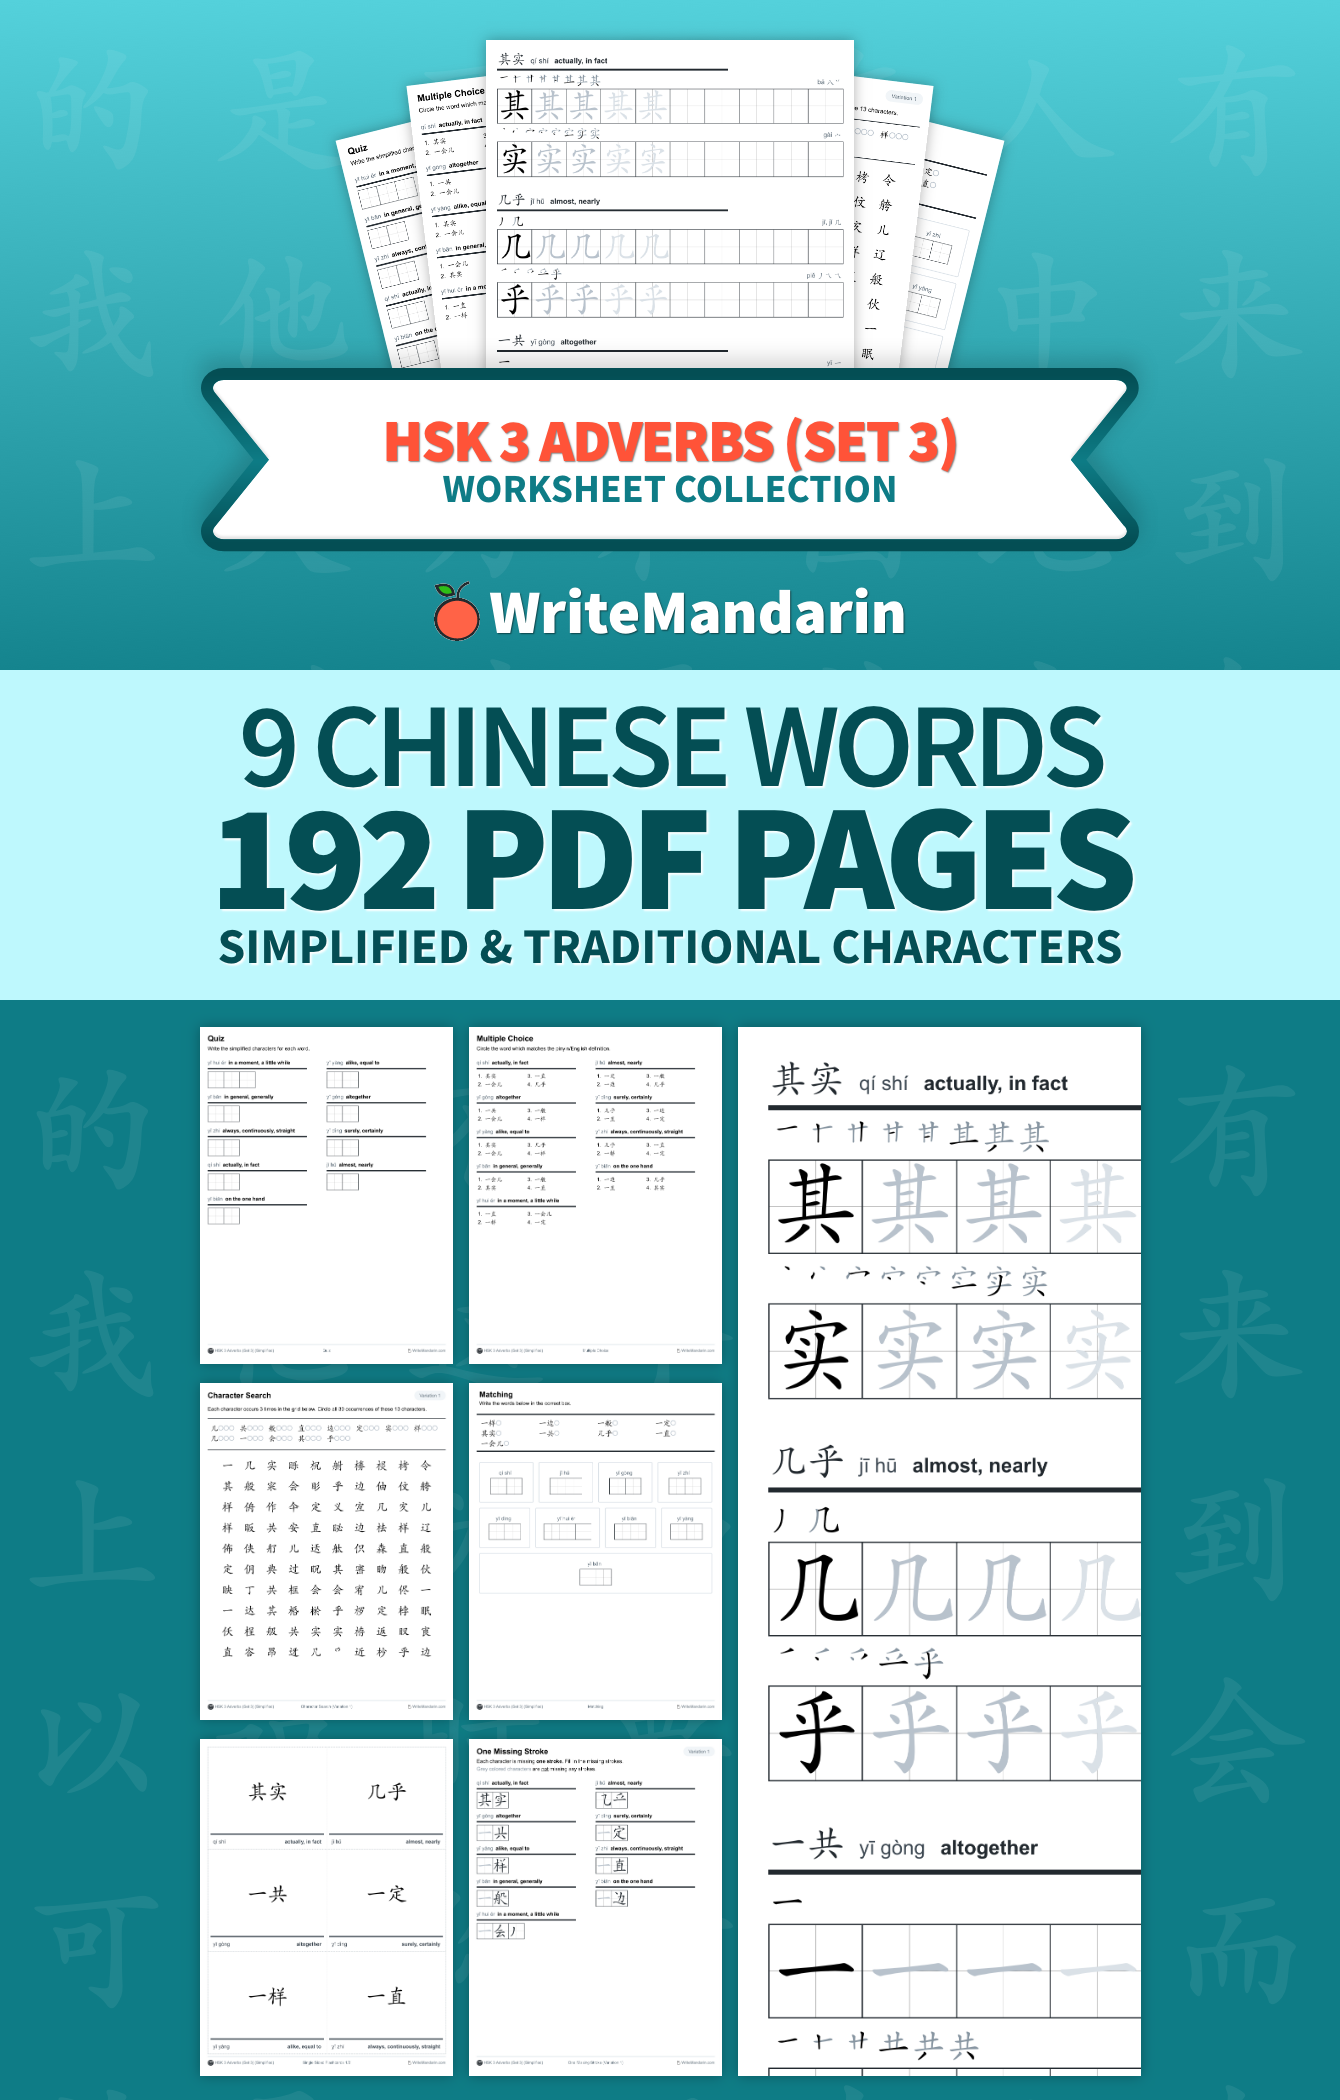 Preview image of HSK 3 Adverbs (Set 3) worksheet collection